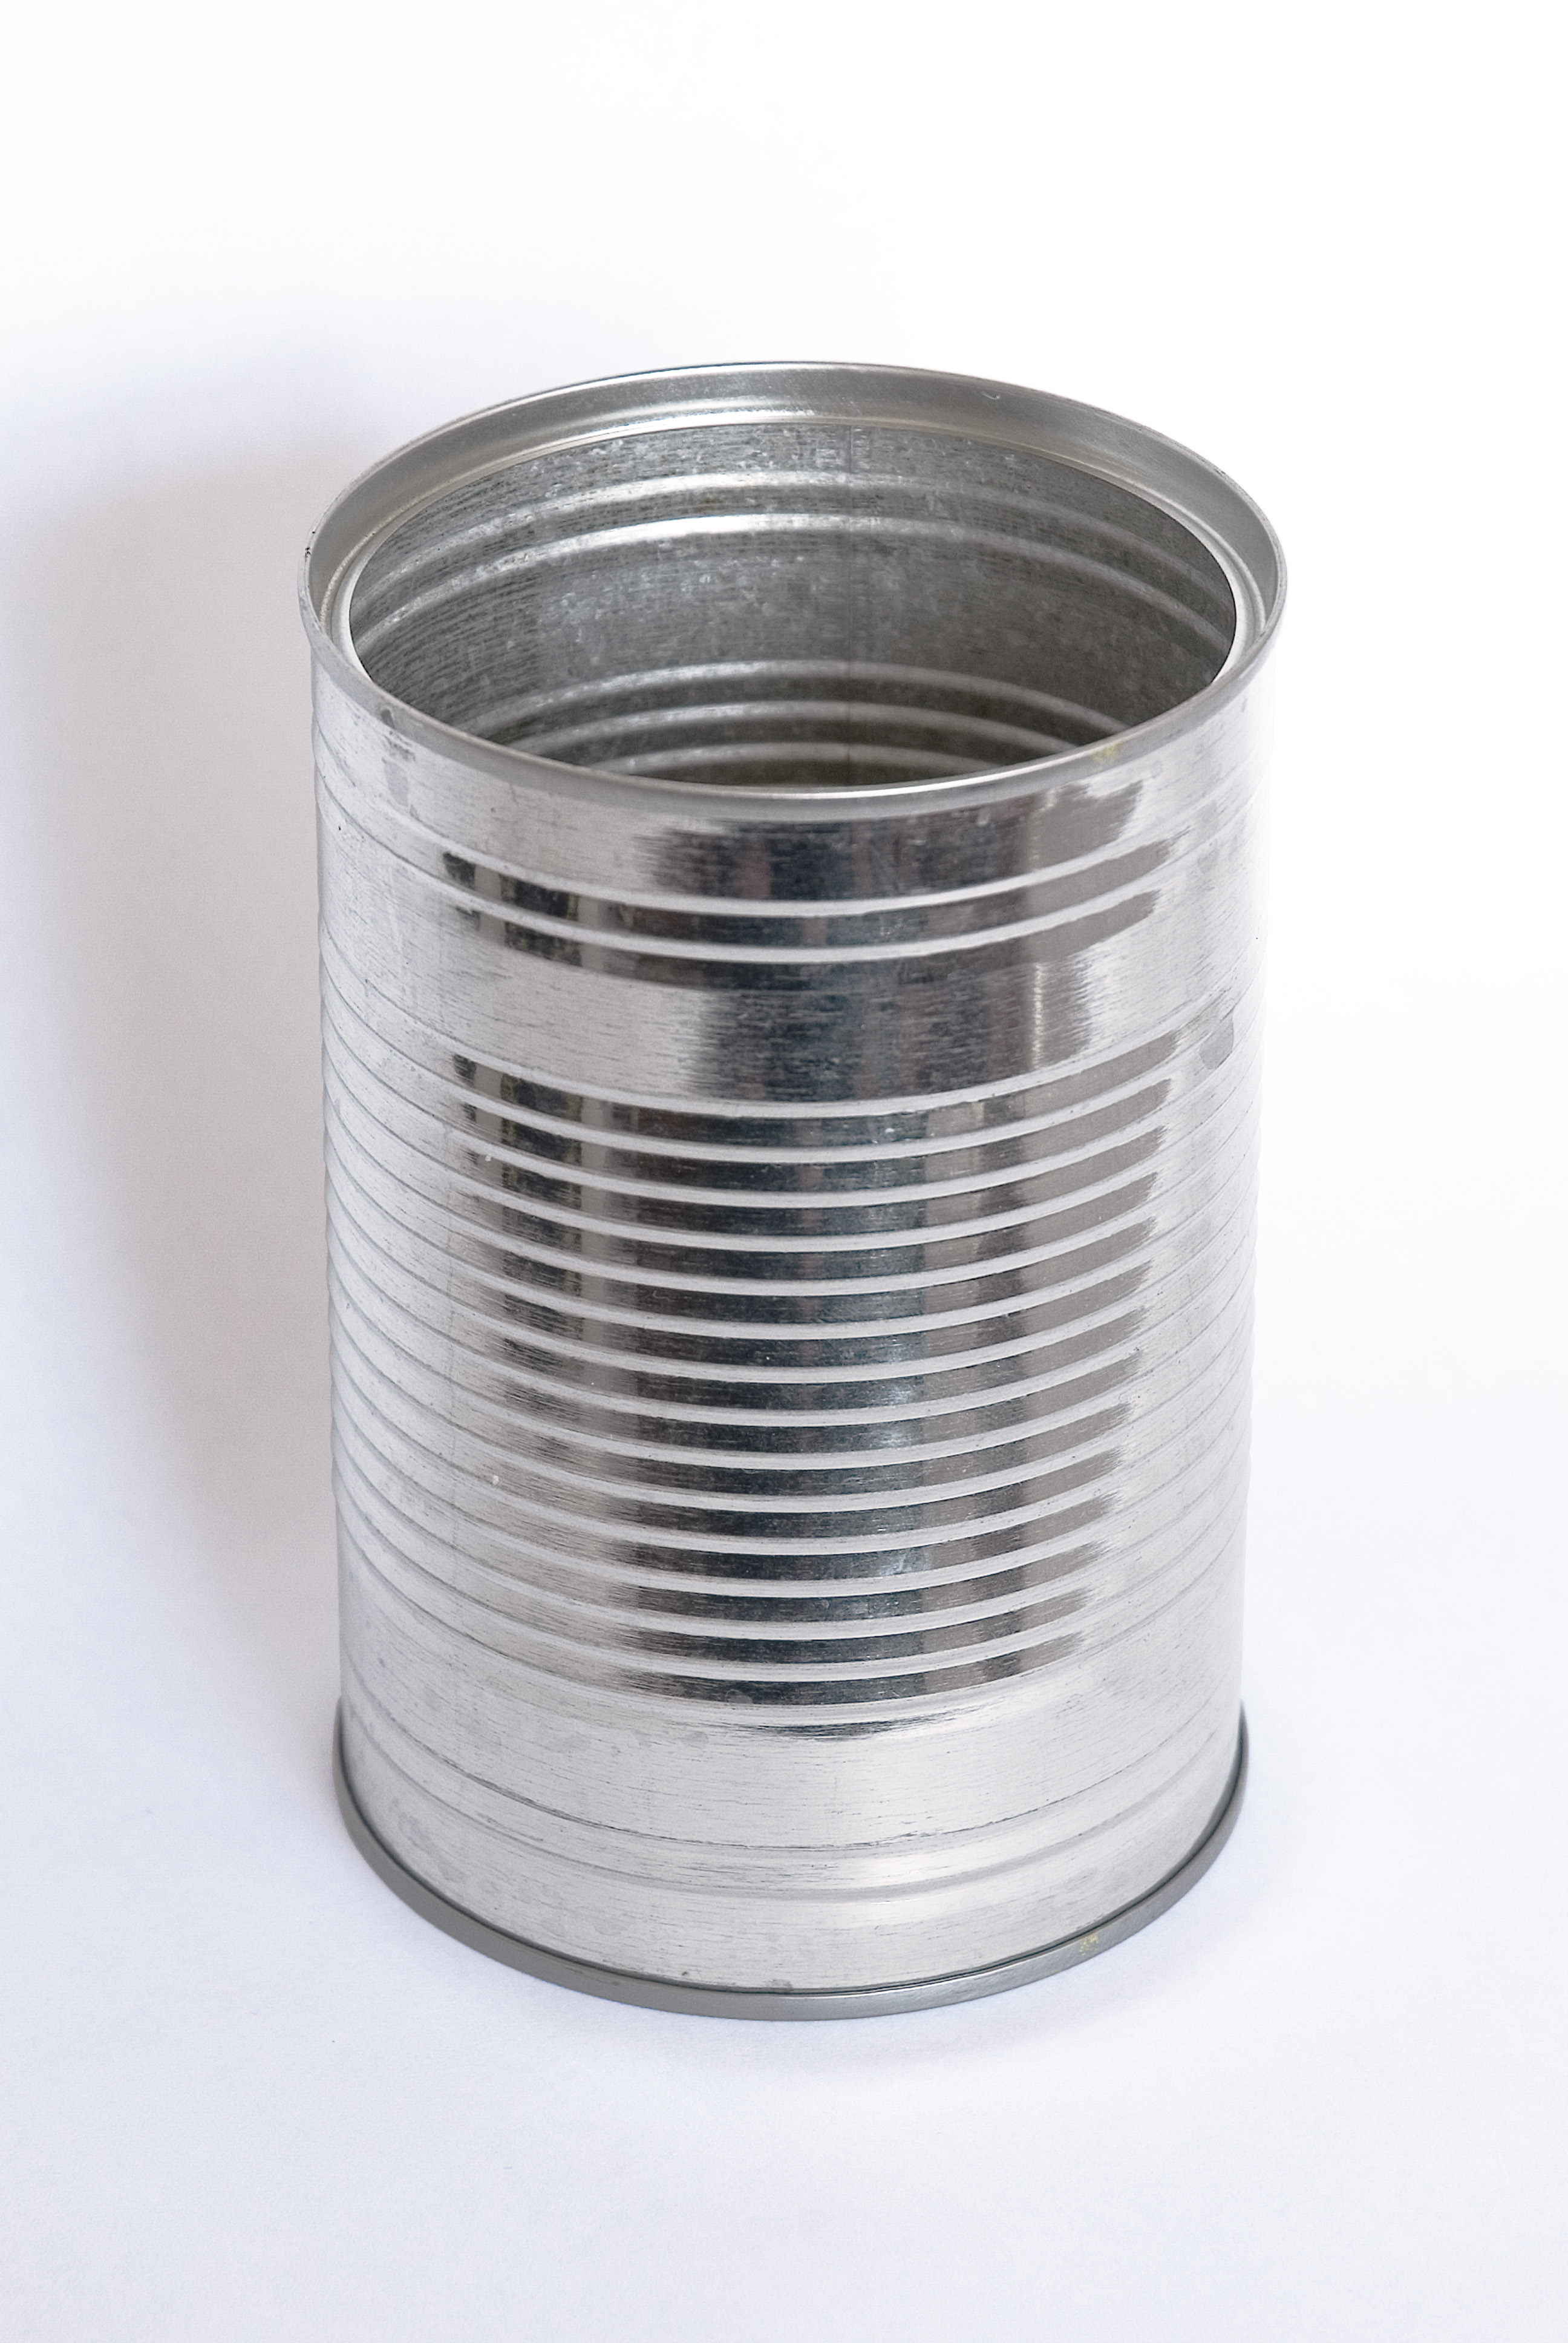 Comparison of tin cans and glass jars used in canning